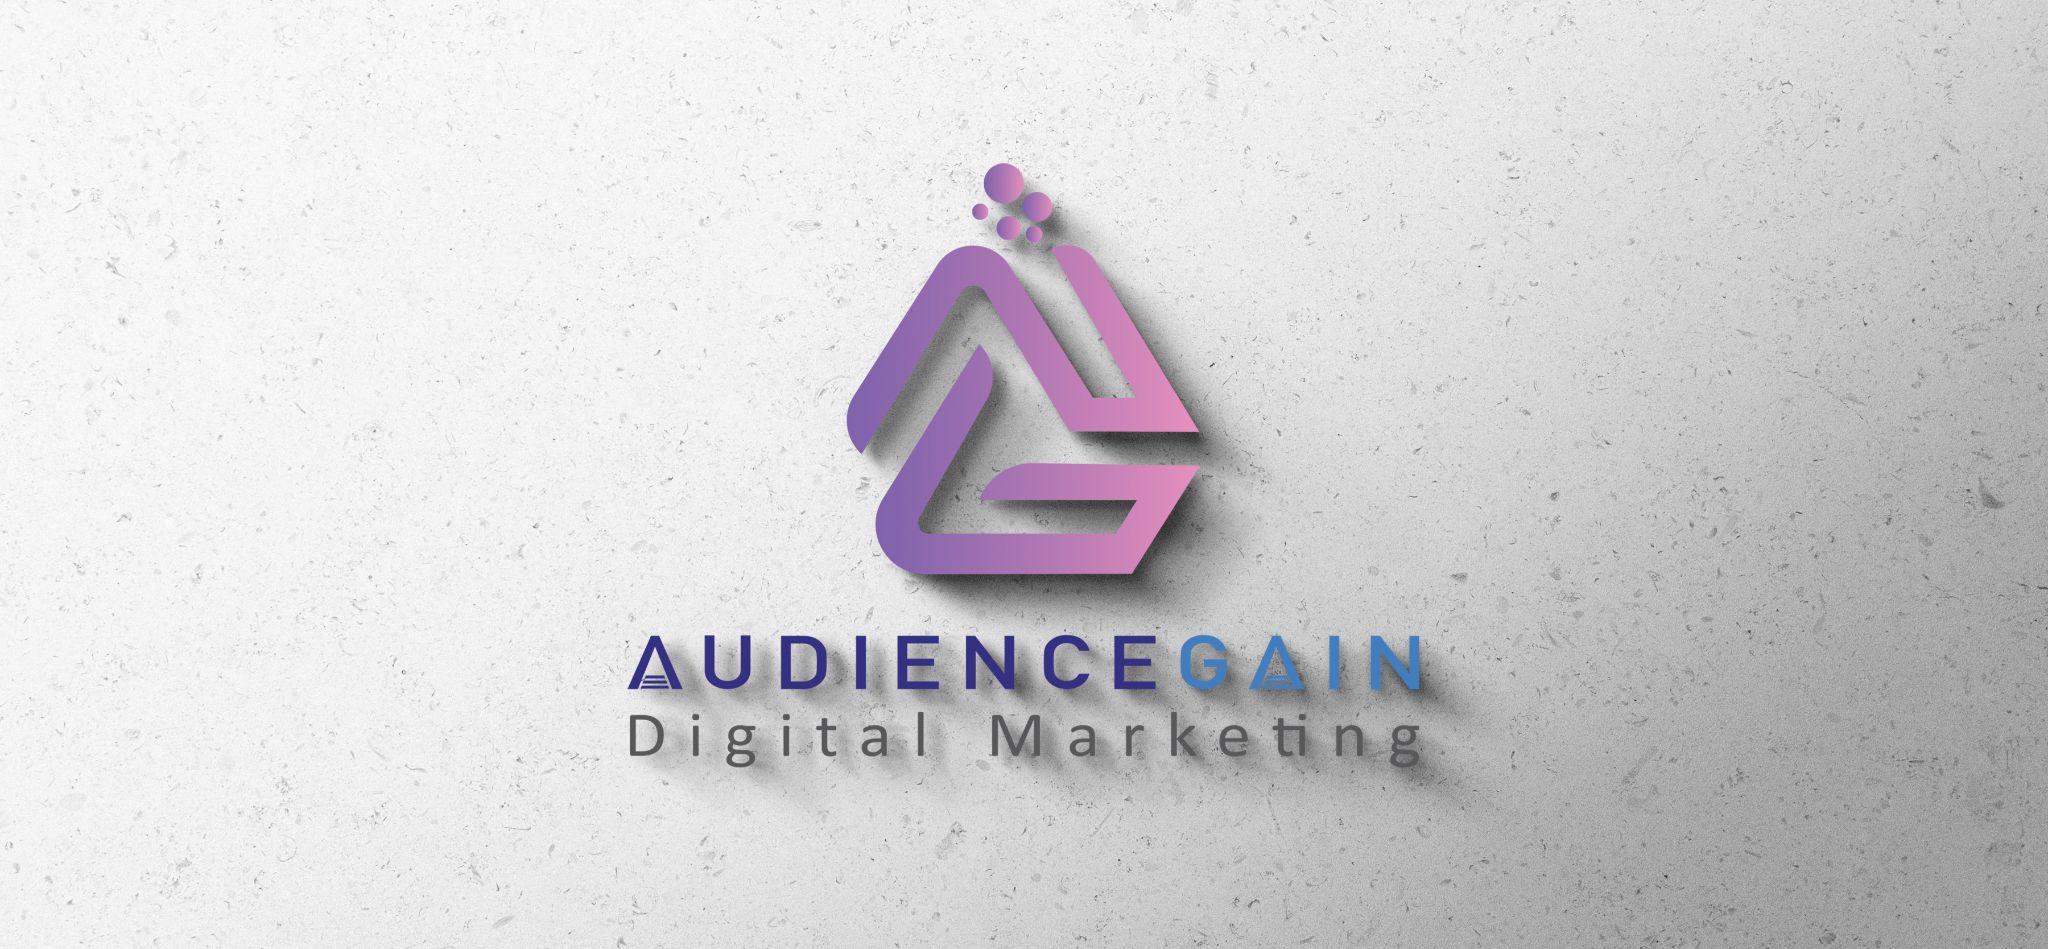 AudienceGain.net Overview